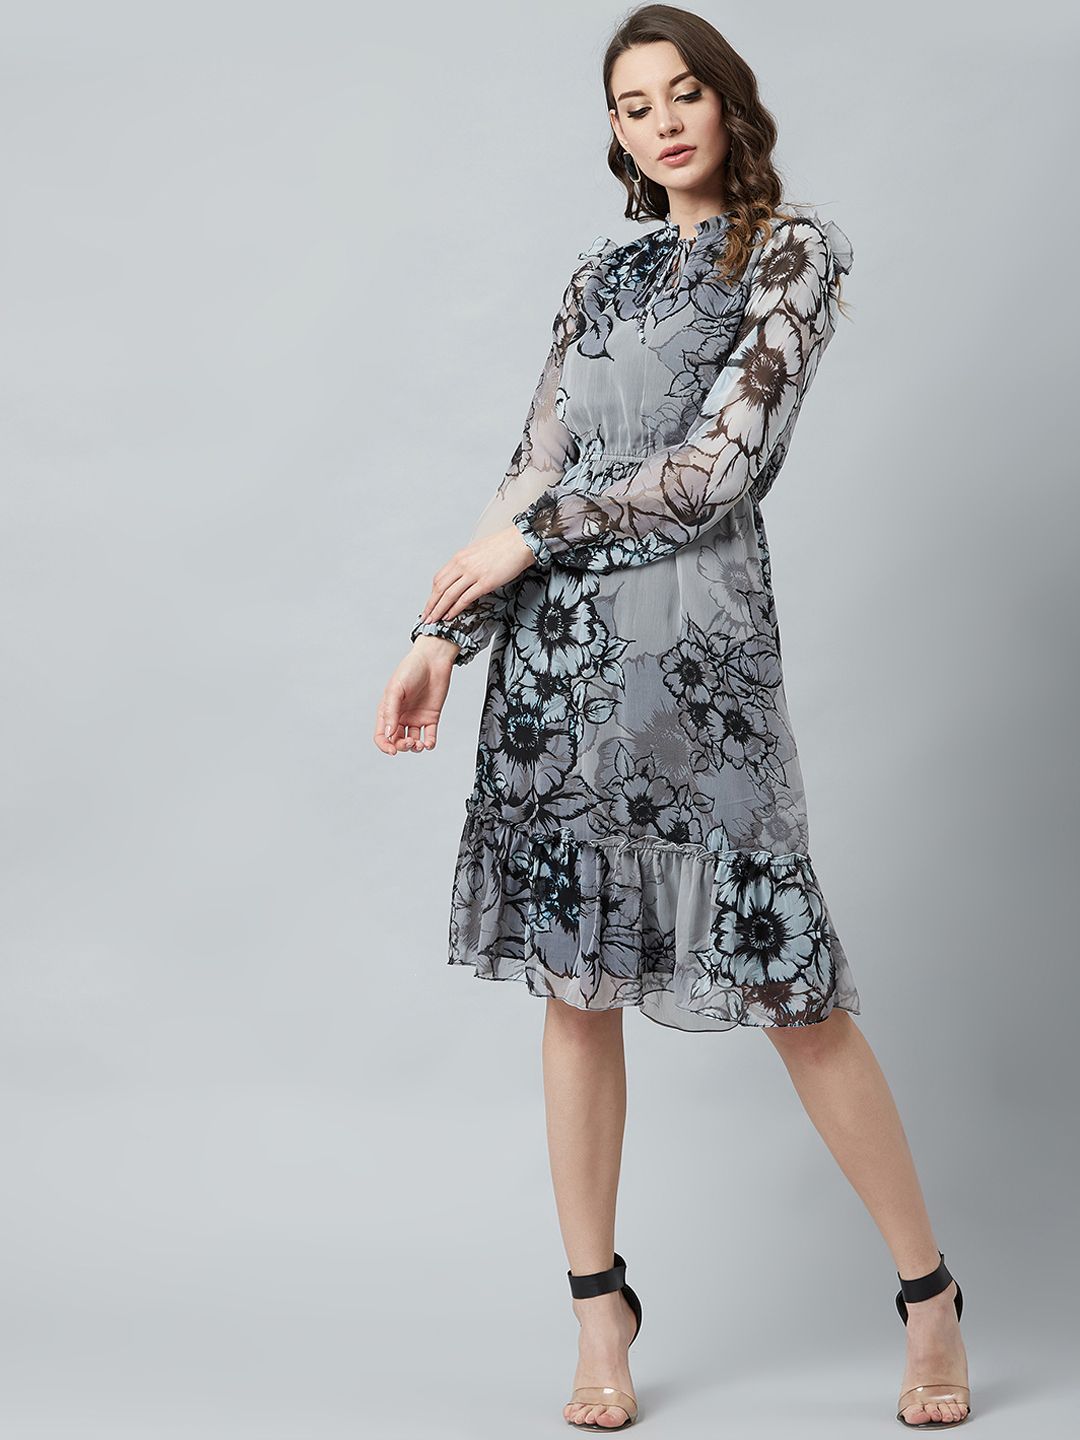 Athena Grey Floral Printed Fit and Flare Dress Price in India